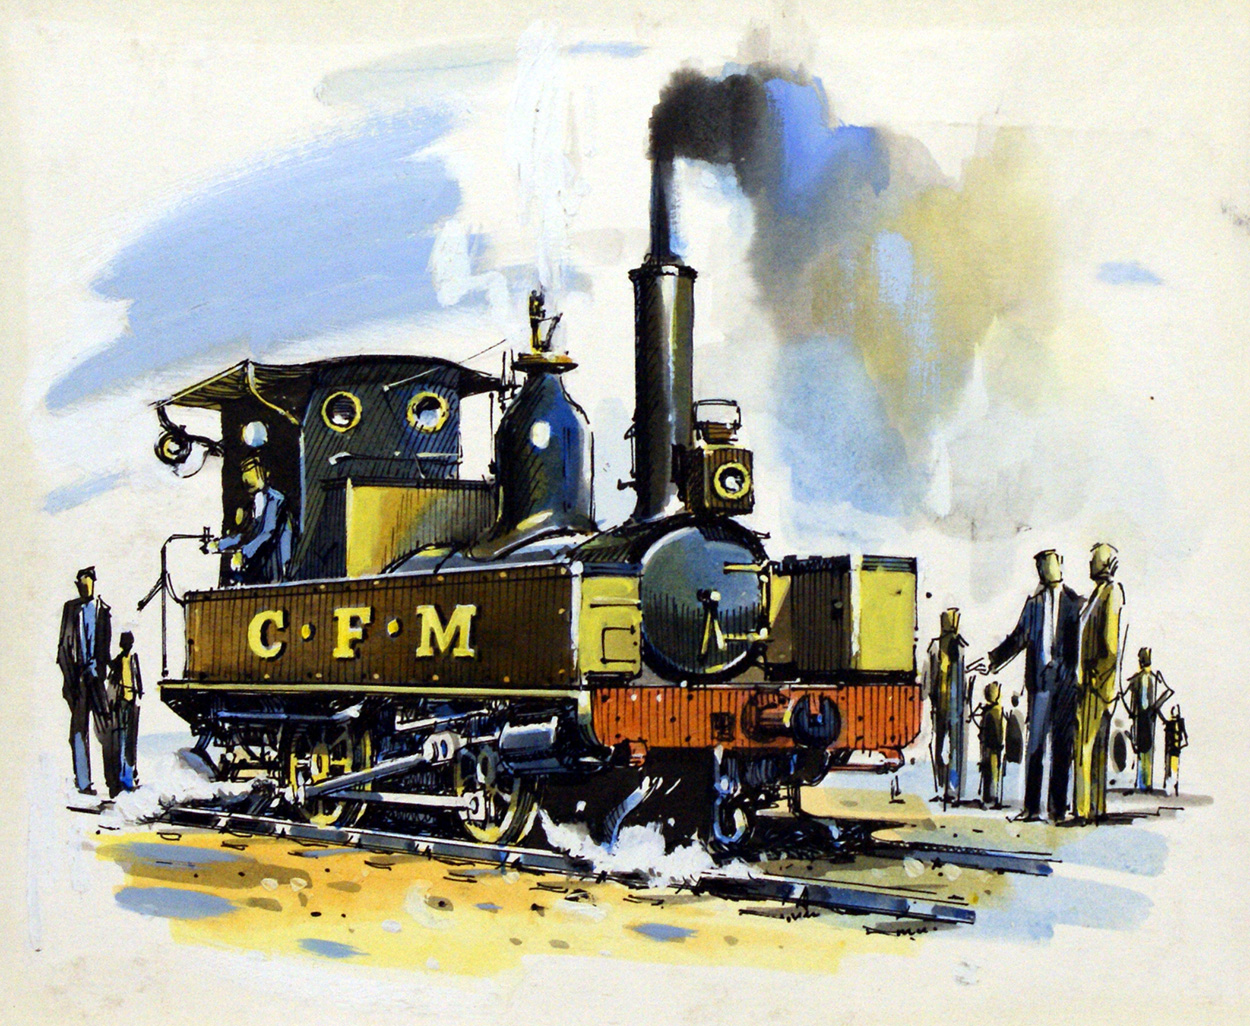 Stoking up the Engine (Original) art by John S Smith Art at The Illustration Art Gallery